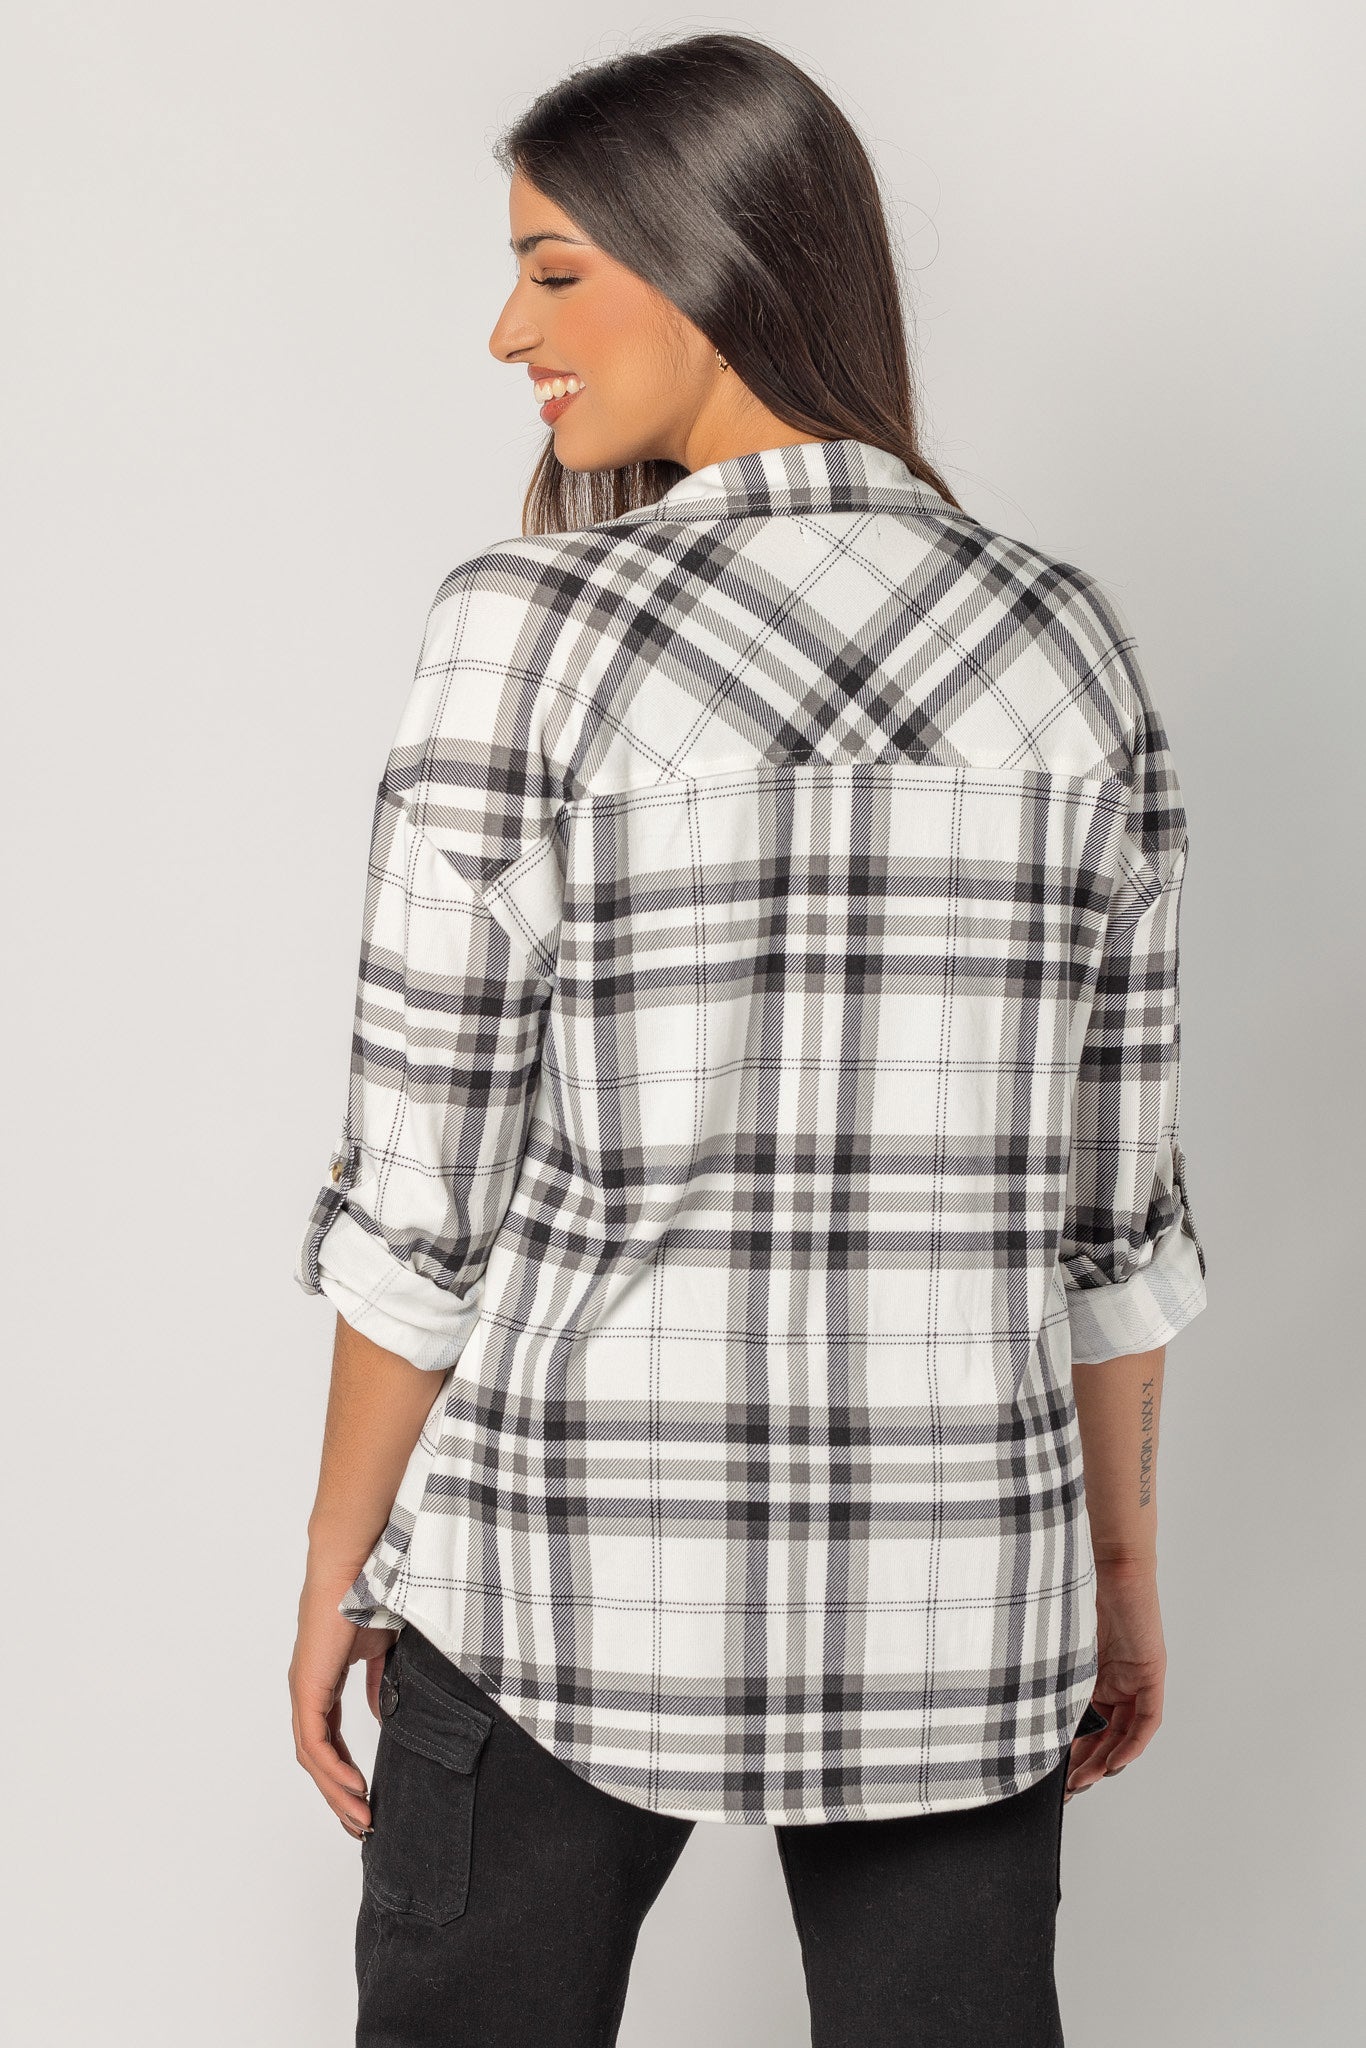 Cozy Plaid Shirt with Roll-Up Sleeves